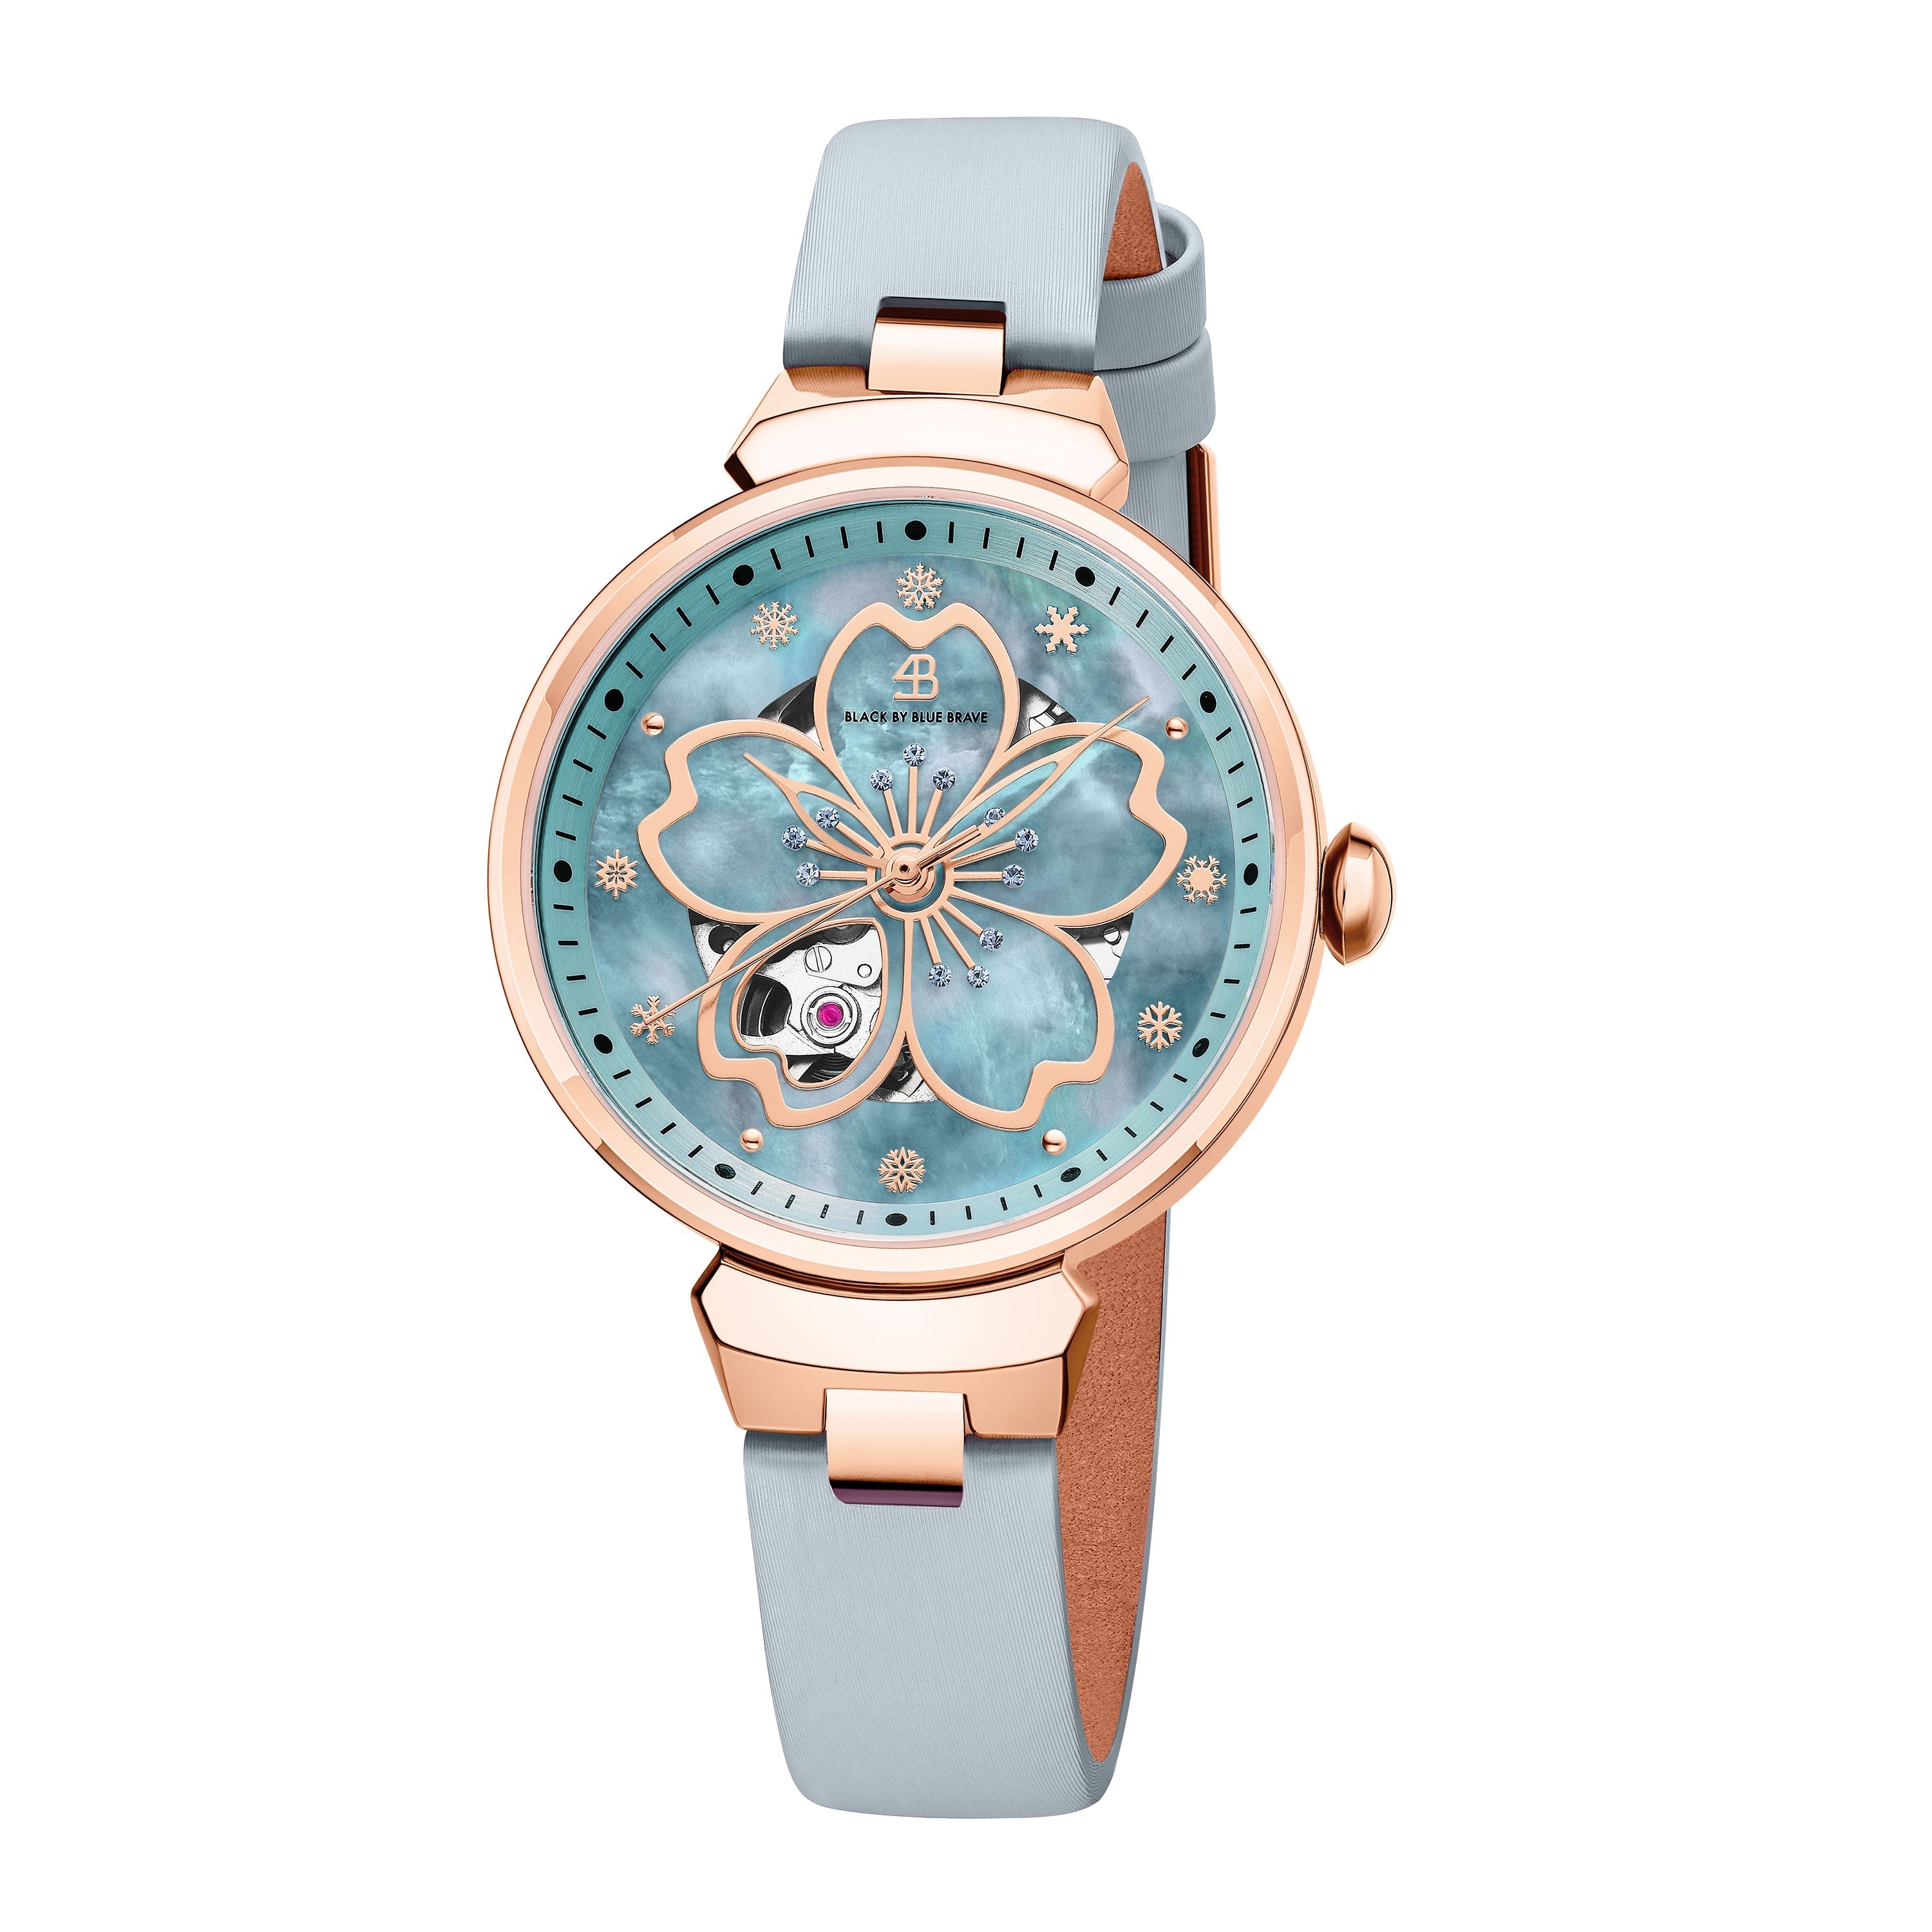 Blue Cherry Blossom 36mm Automatic Watch & Rosegold Flower Earrings & White Ceramic